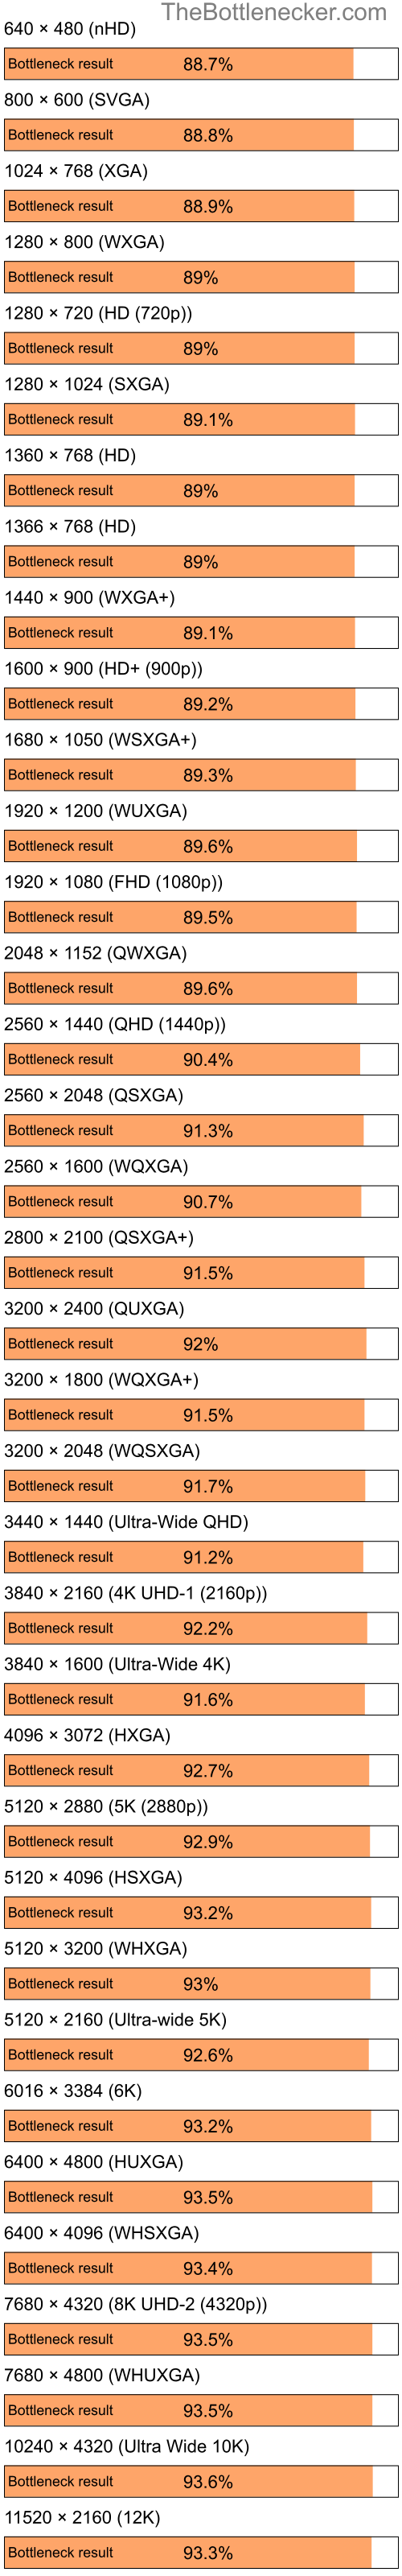 Bottleneck results by resolution for Intel Pentium 4 and NVIDIA GeForce4 MX 4000 in General Tasks